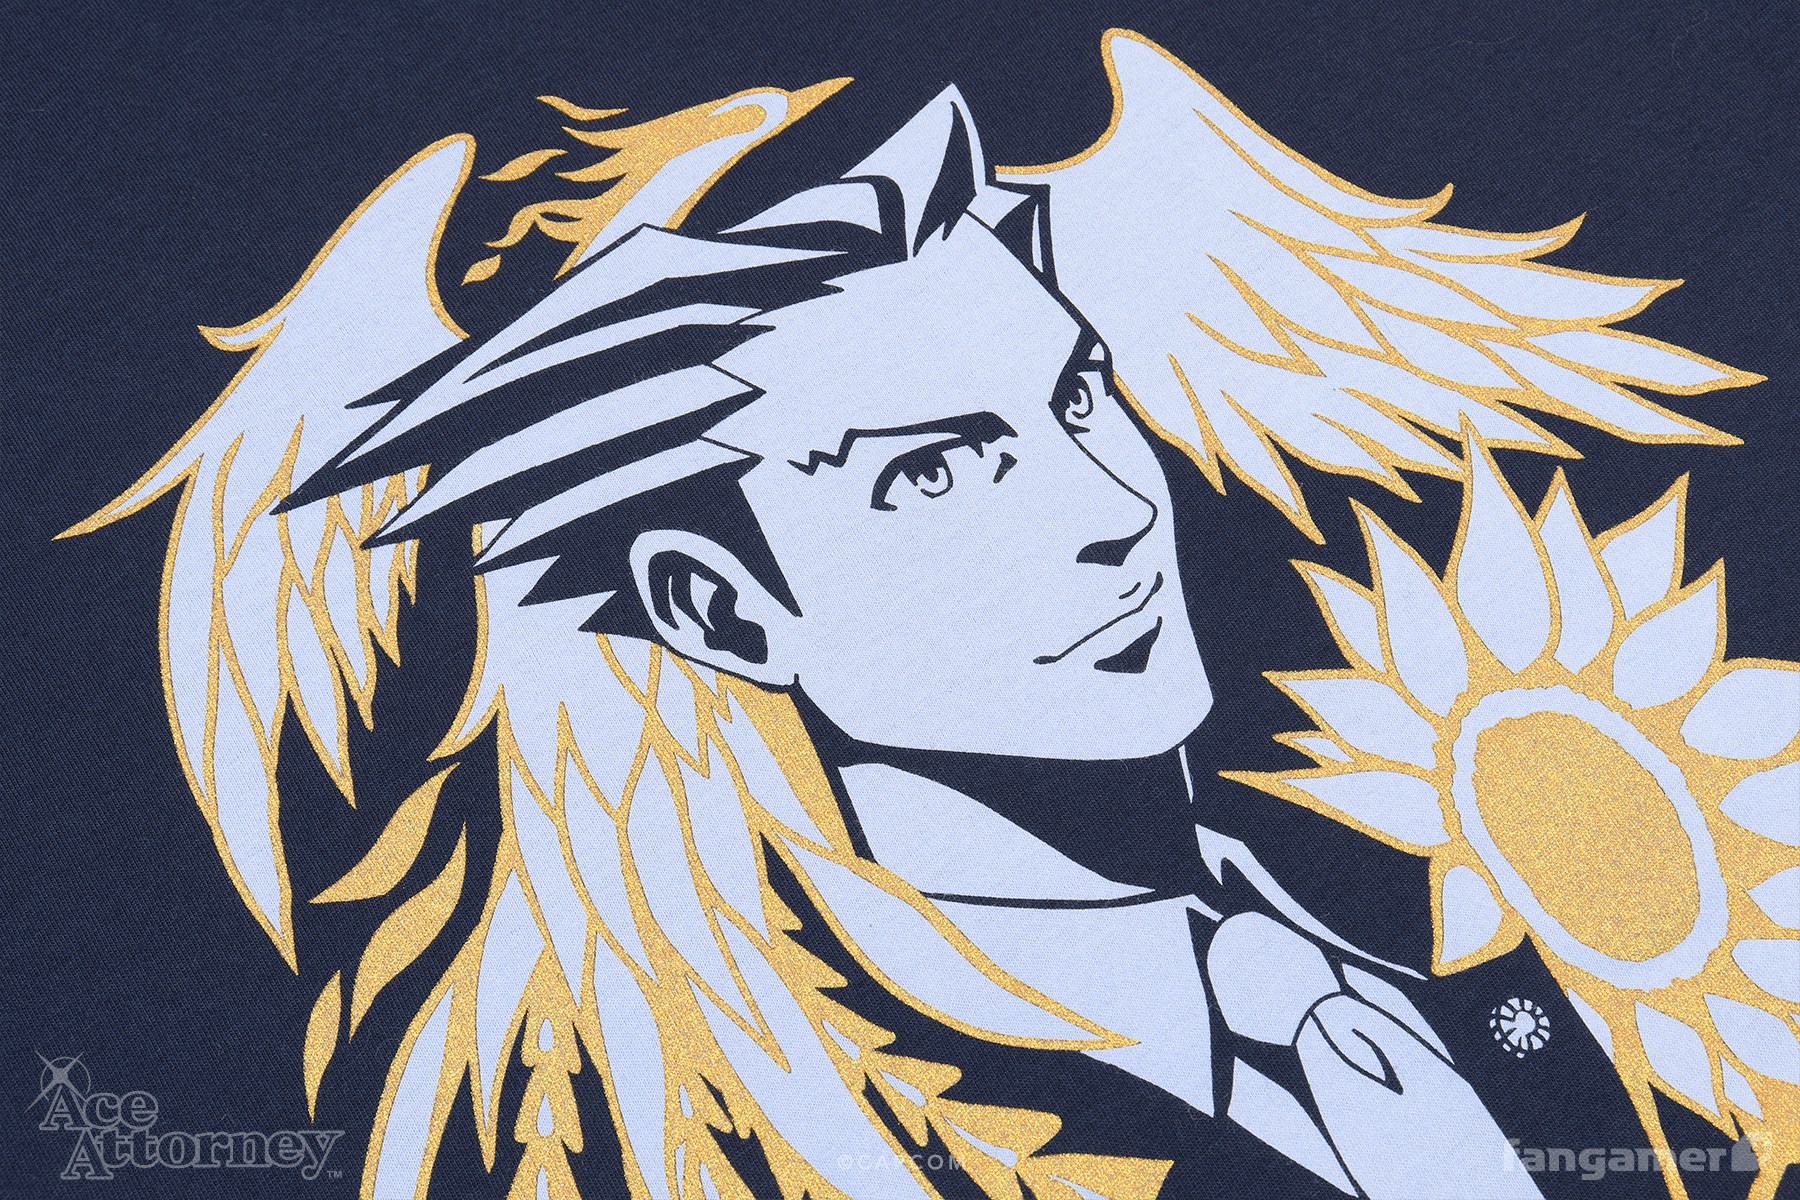 Ace Attorney - Classy-Action Lawsuit - Fangamer